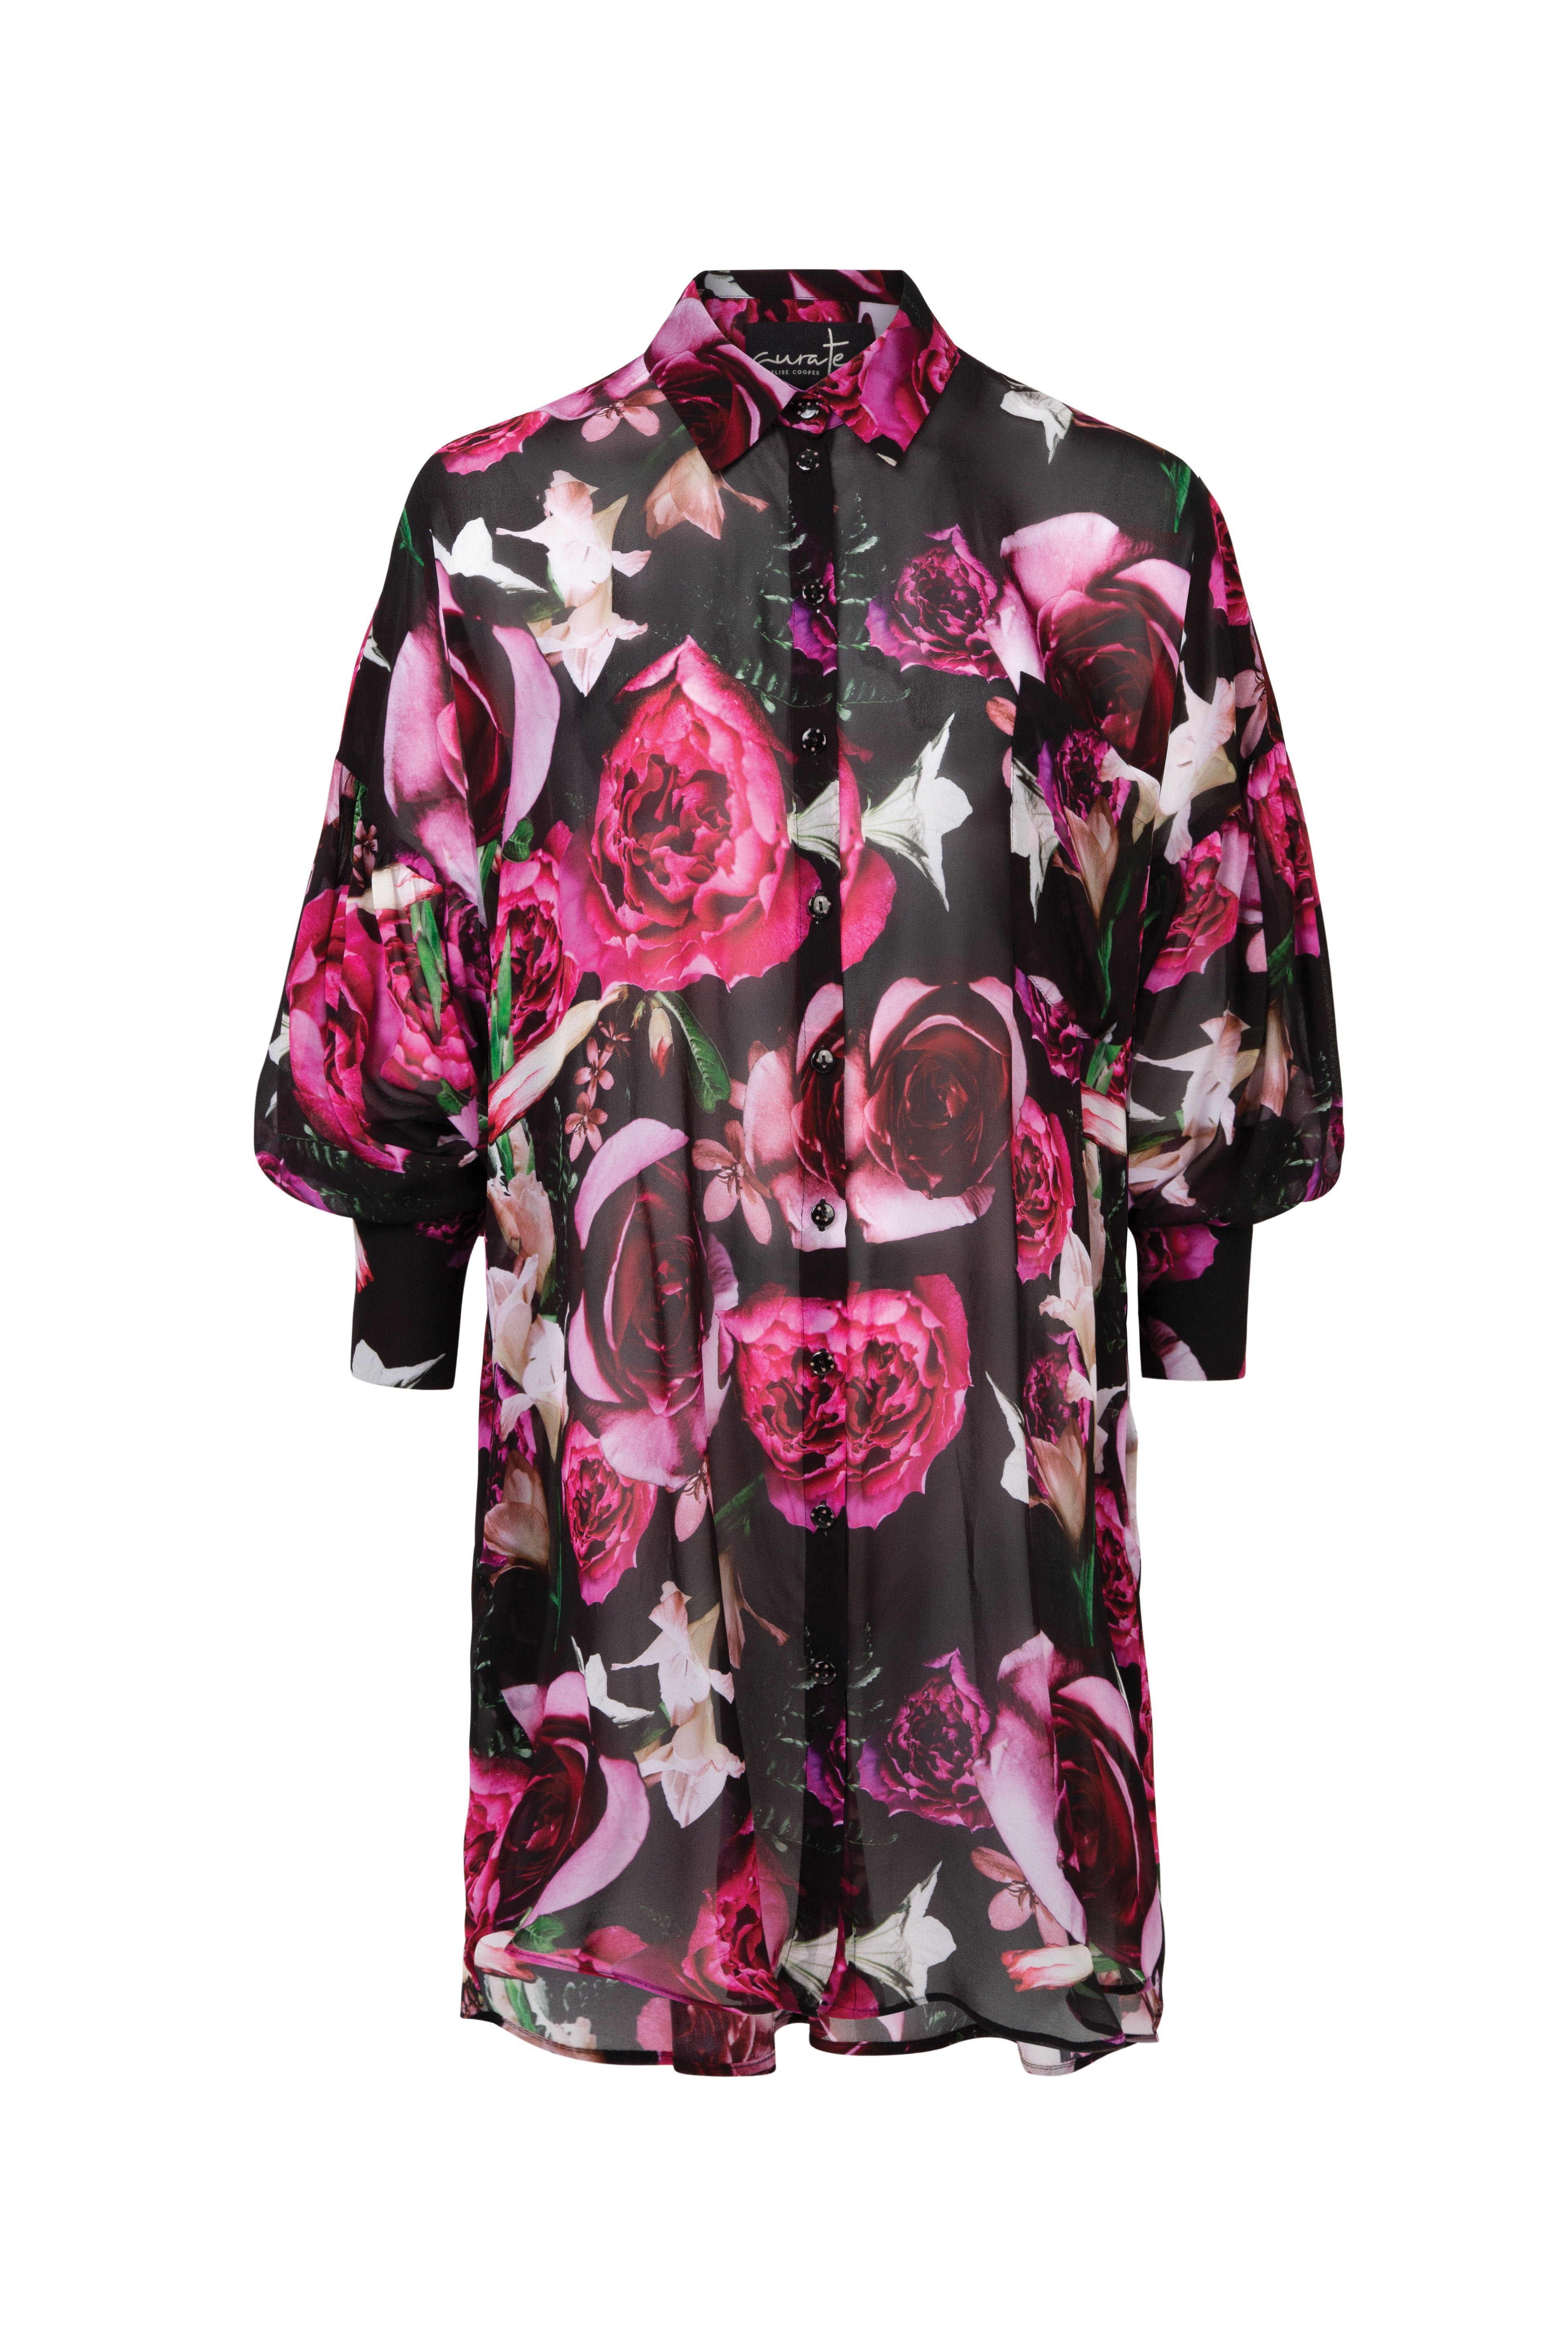 Curate by Trelise Cooper Something Borrowed Shirt